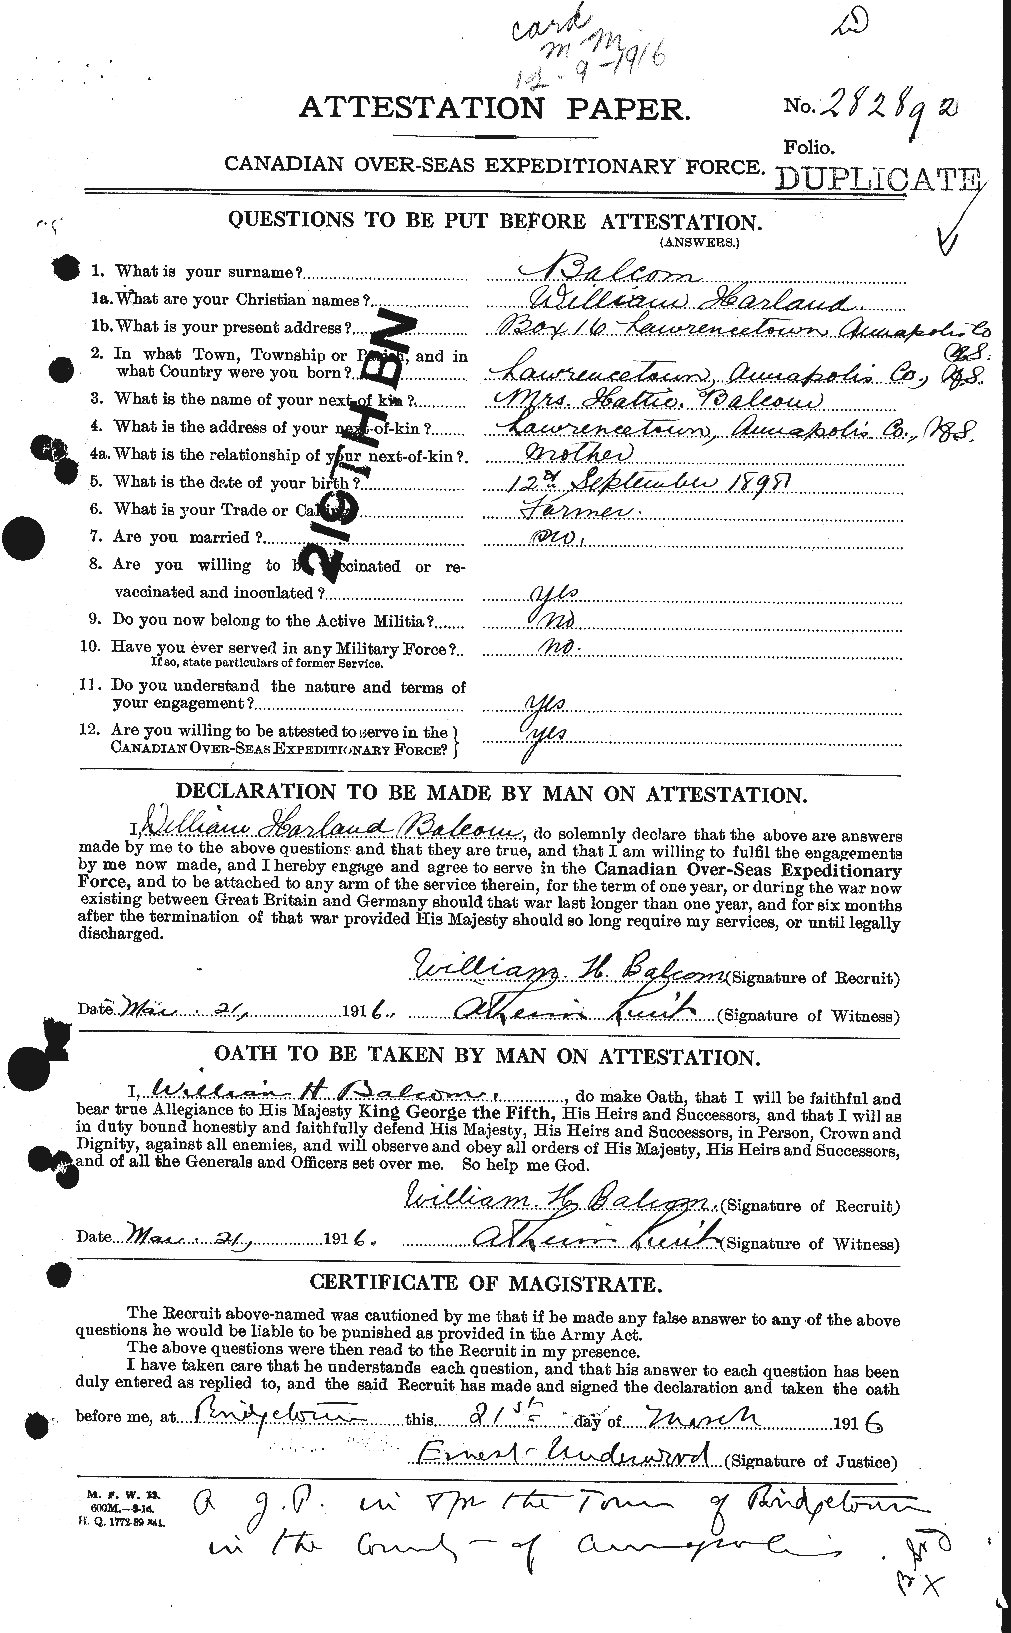 Personnel Records of the First World War - CEF 225431a